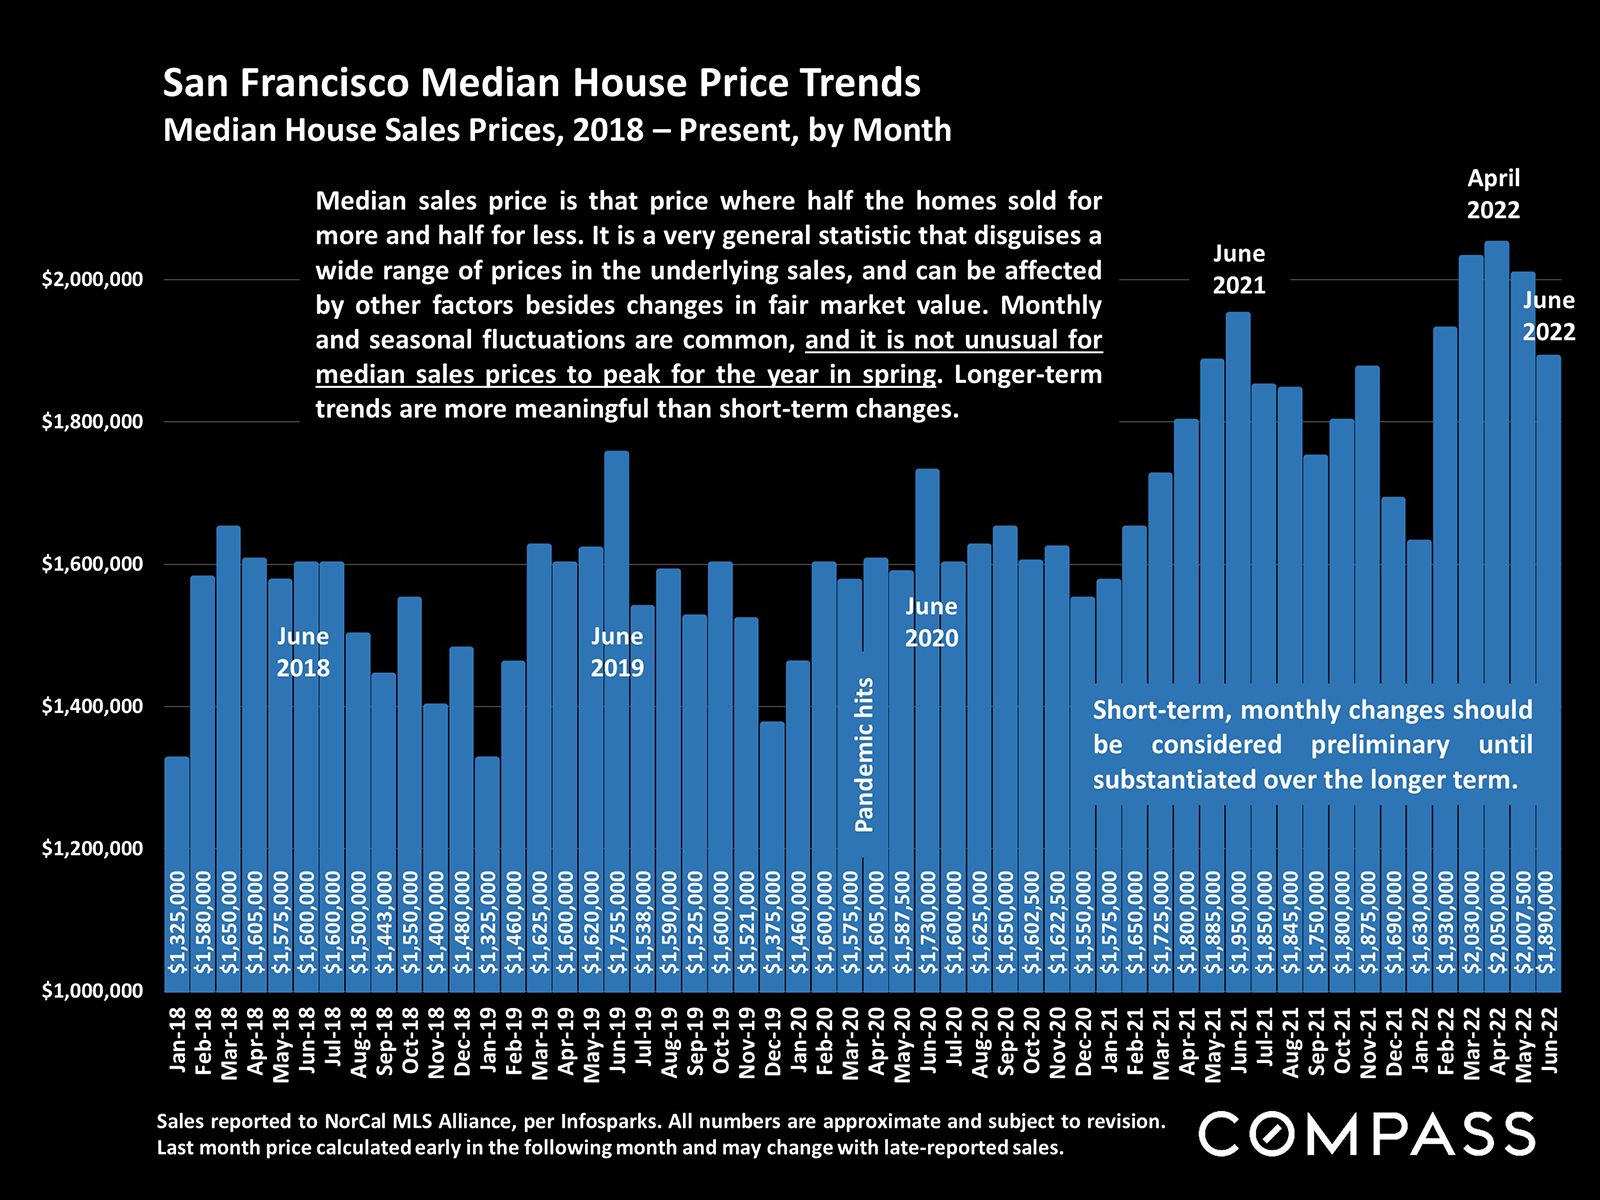 Median House Price Trends